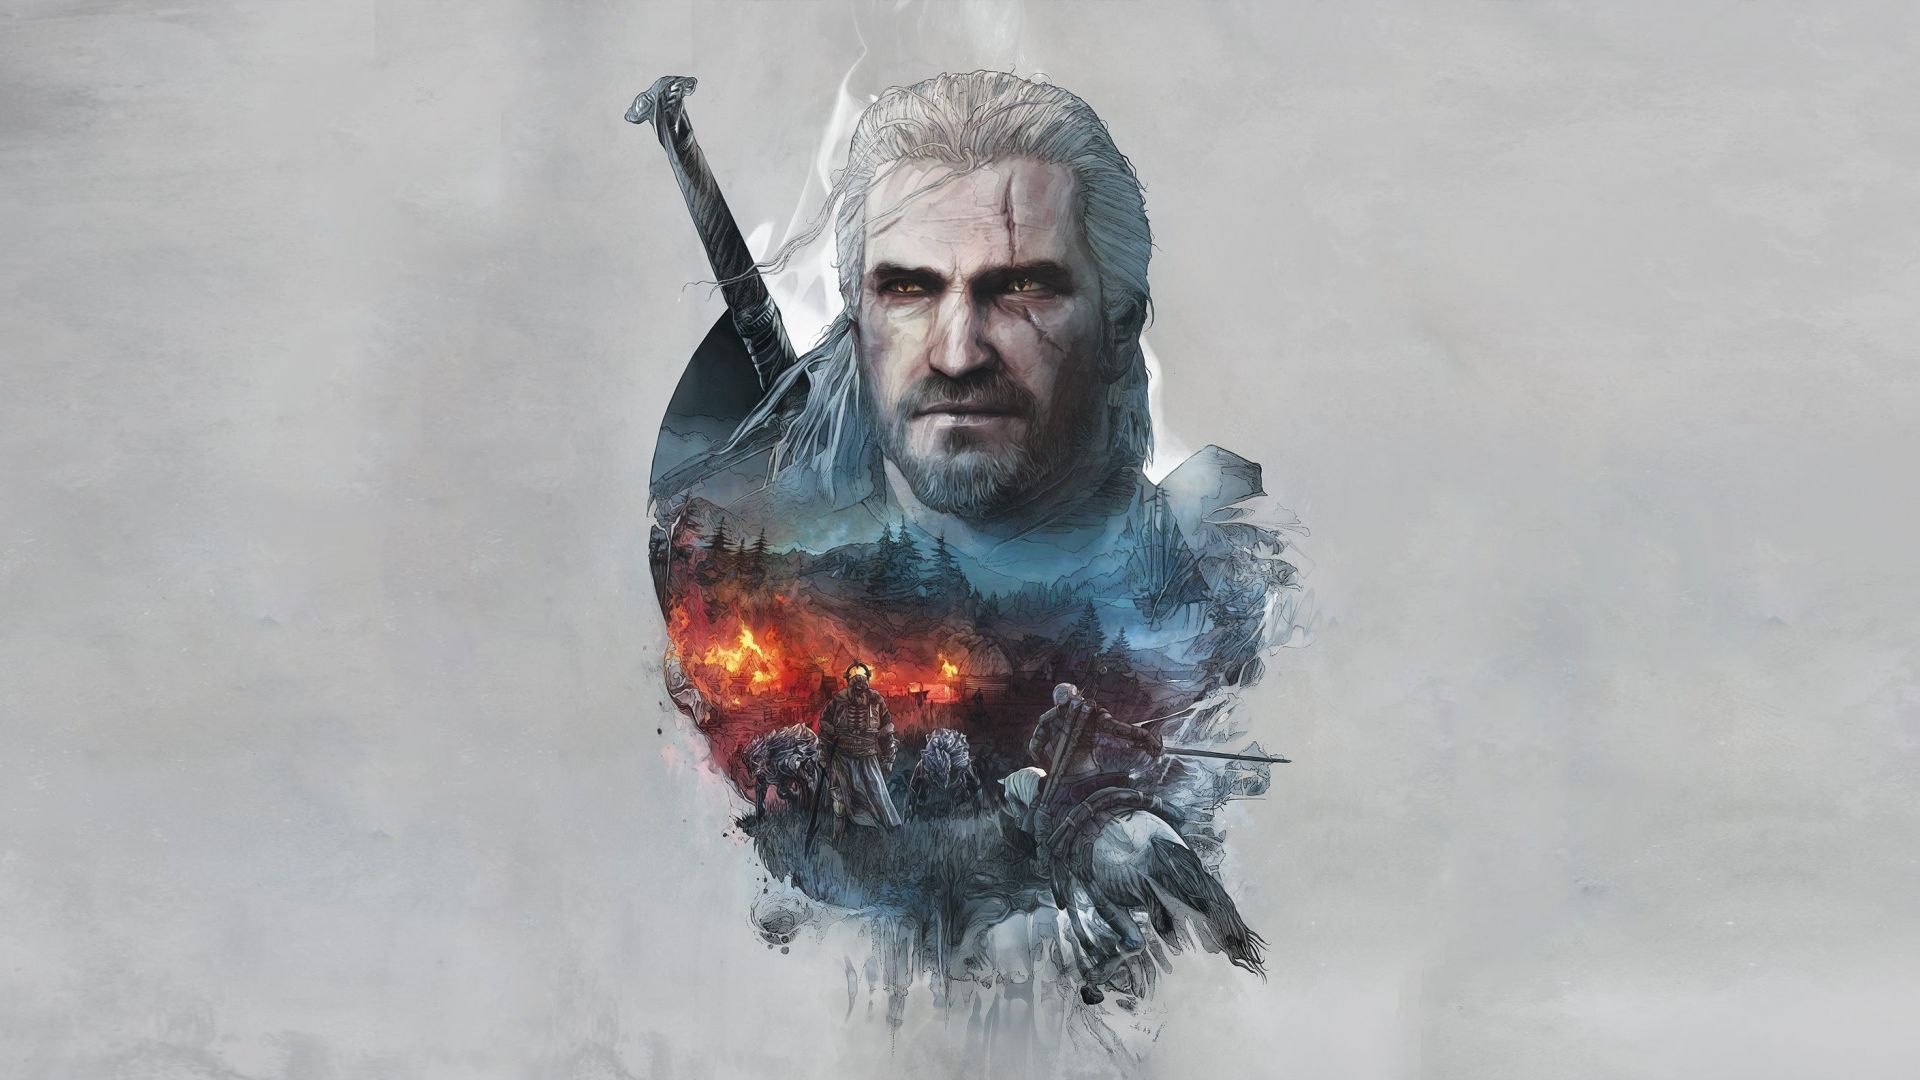 560150 1680x1050 the witcher 3 wallpapers 1080p high quality  Rare Gallery  HD Wallpapers